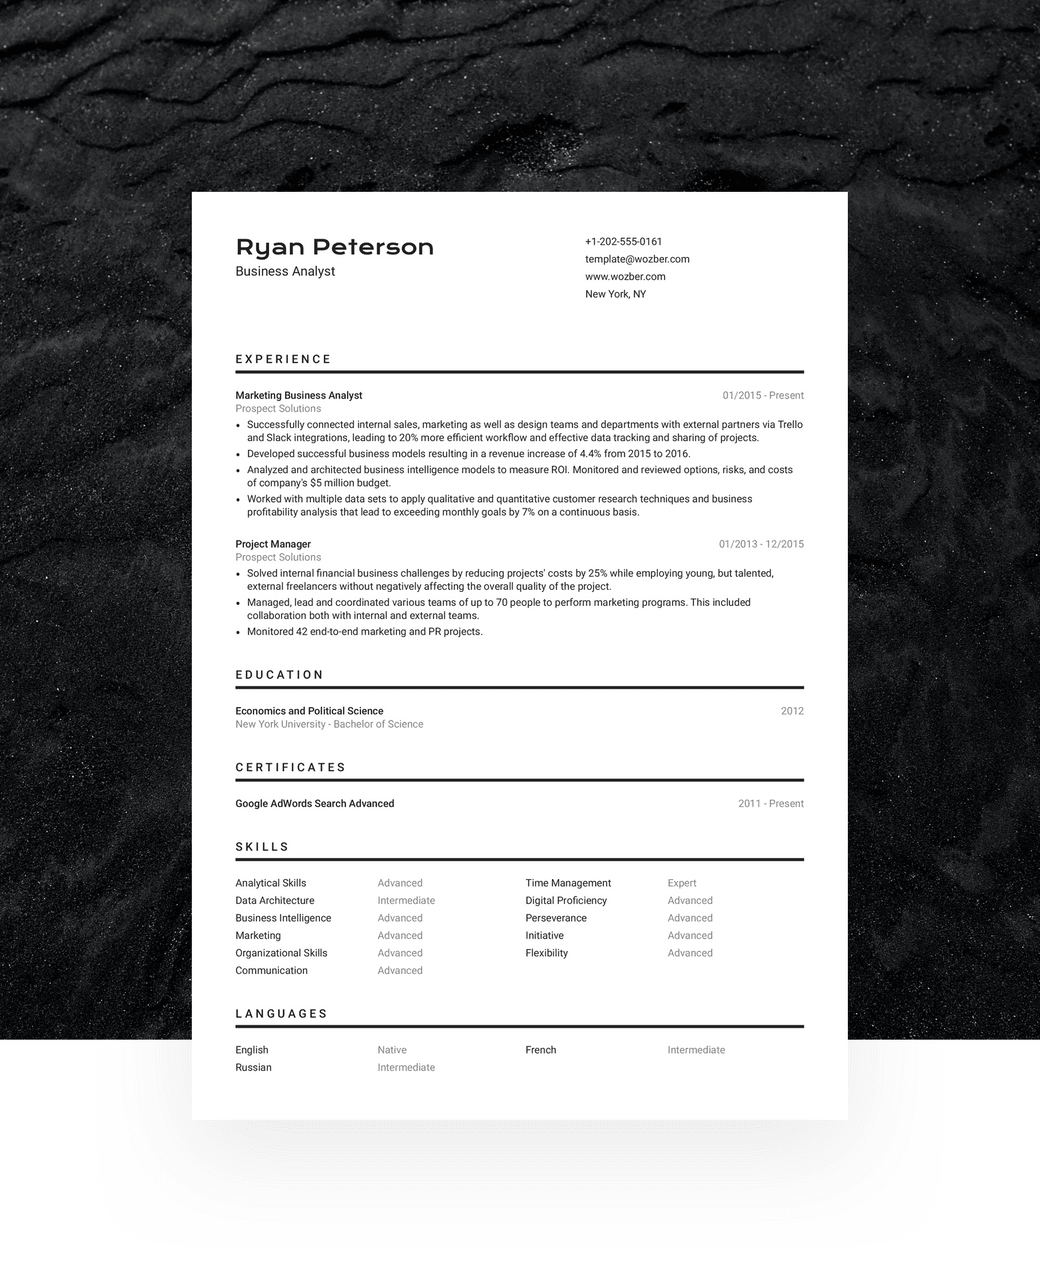 A modern, ATS-friendly resume template for job seekers who want to look sharp and confident.